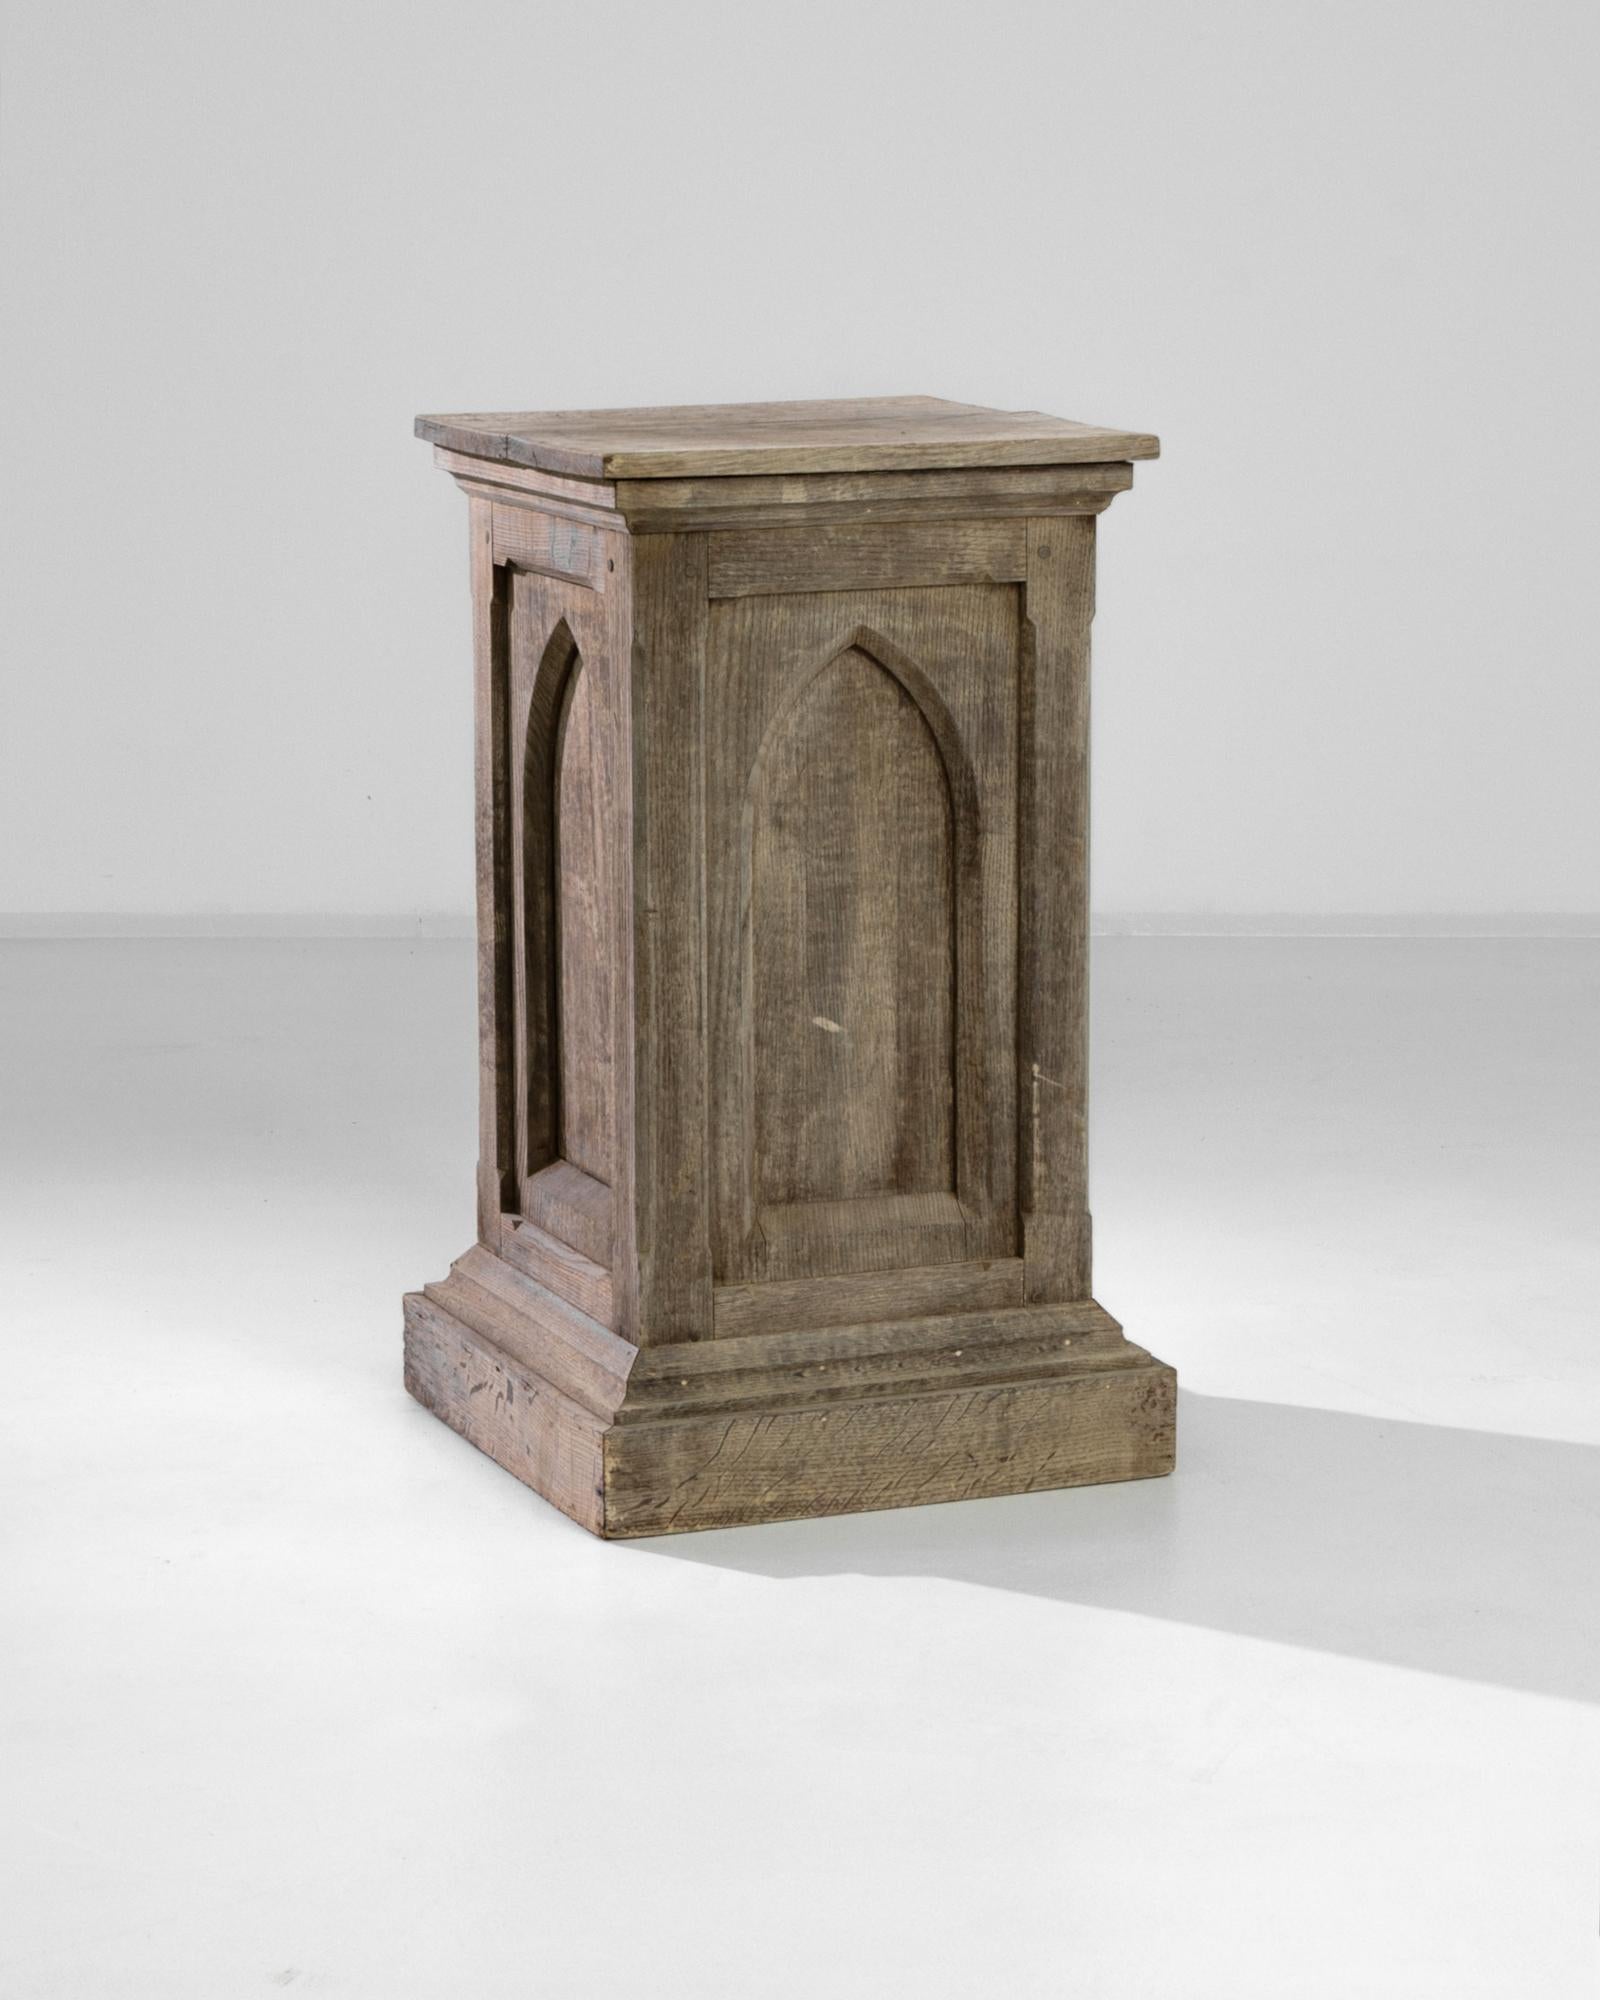 This antique bleached oak pedestal was crafted in France, circa 1900. A dignified case stands on a stair-step base mirrored by a beveled top, and carved with ogives. The wood has been restored to reveal its original grain, exposing a natural umber